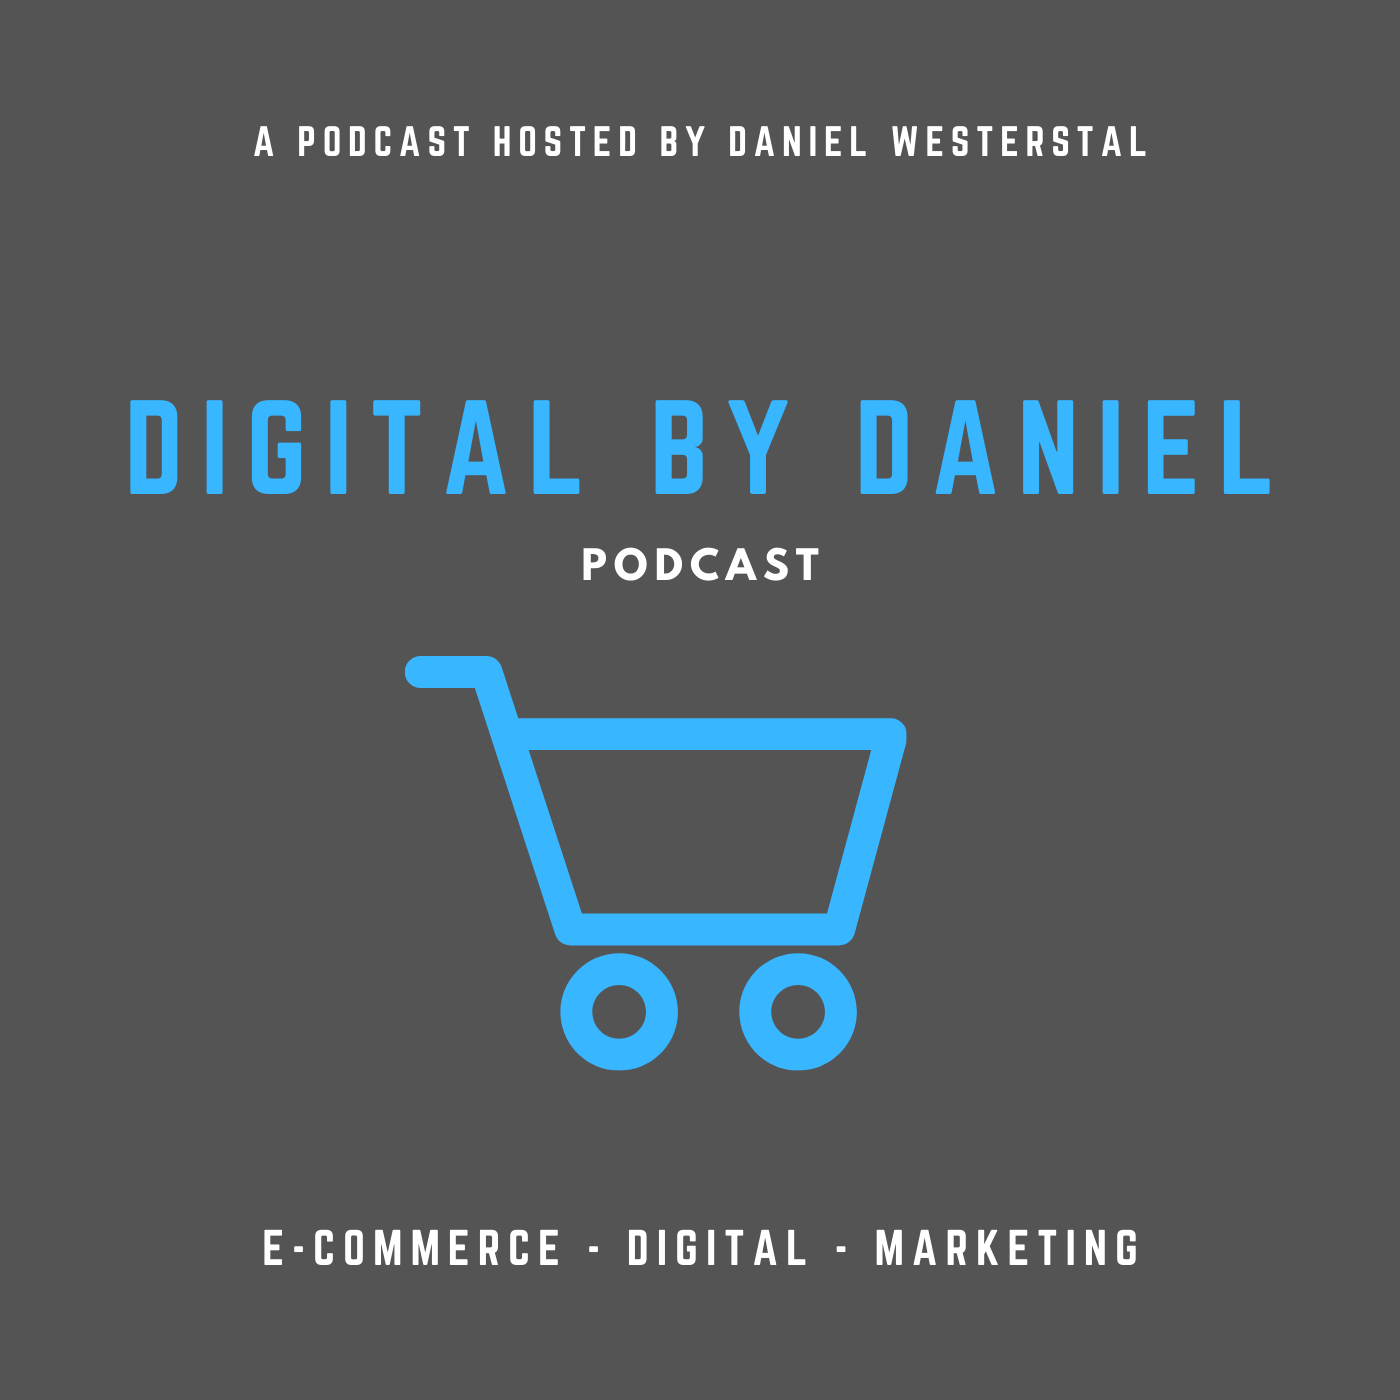 The Digital by Daniel Podcast